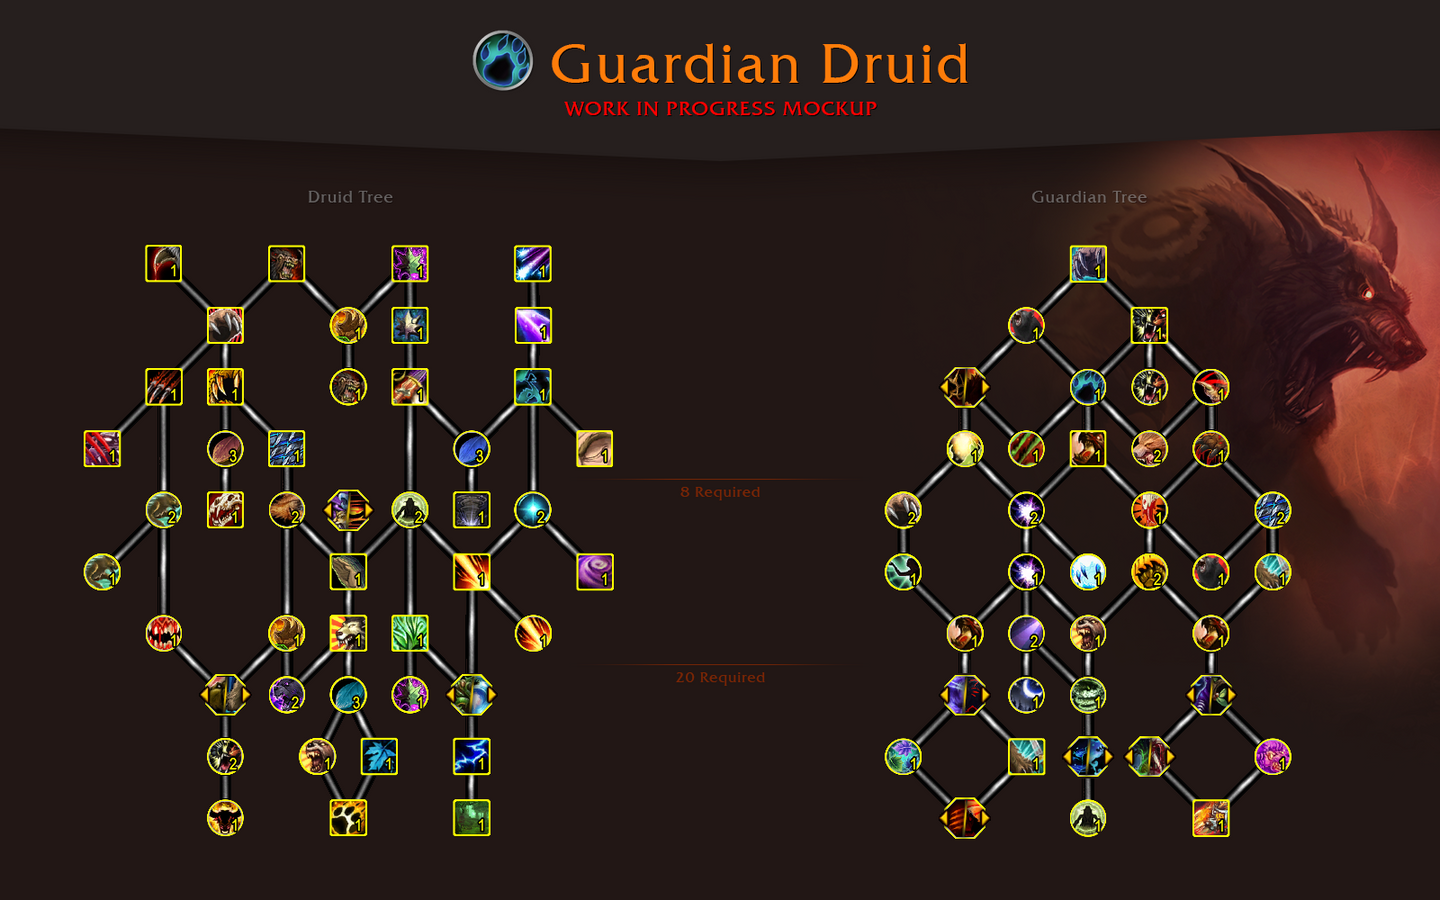 WoW Dragonflight: All Druid Talents and Abilities - Guardian Druid Dragonflight Talents